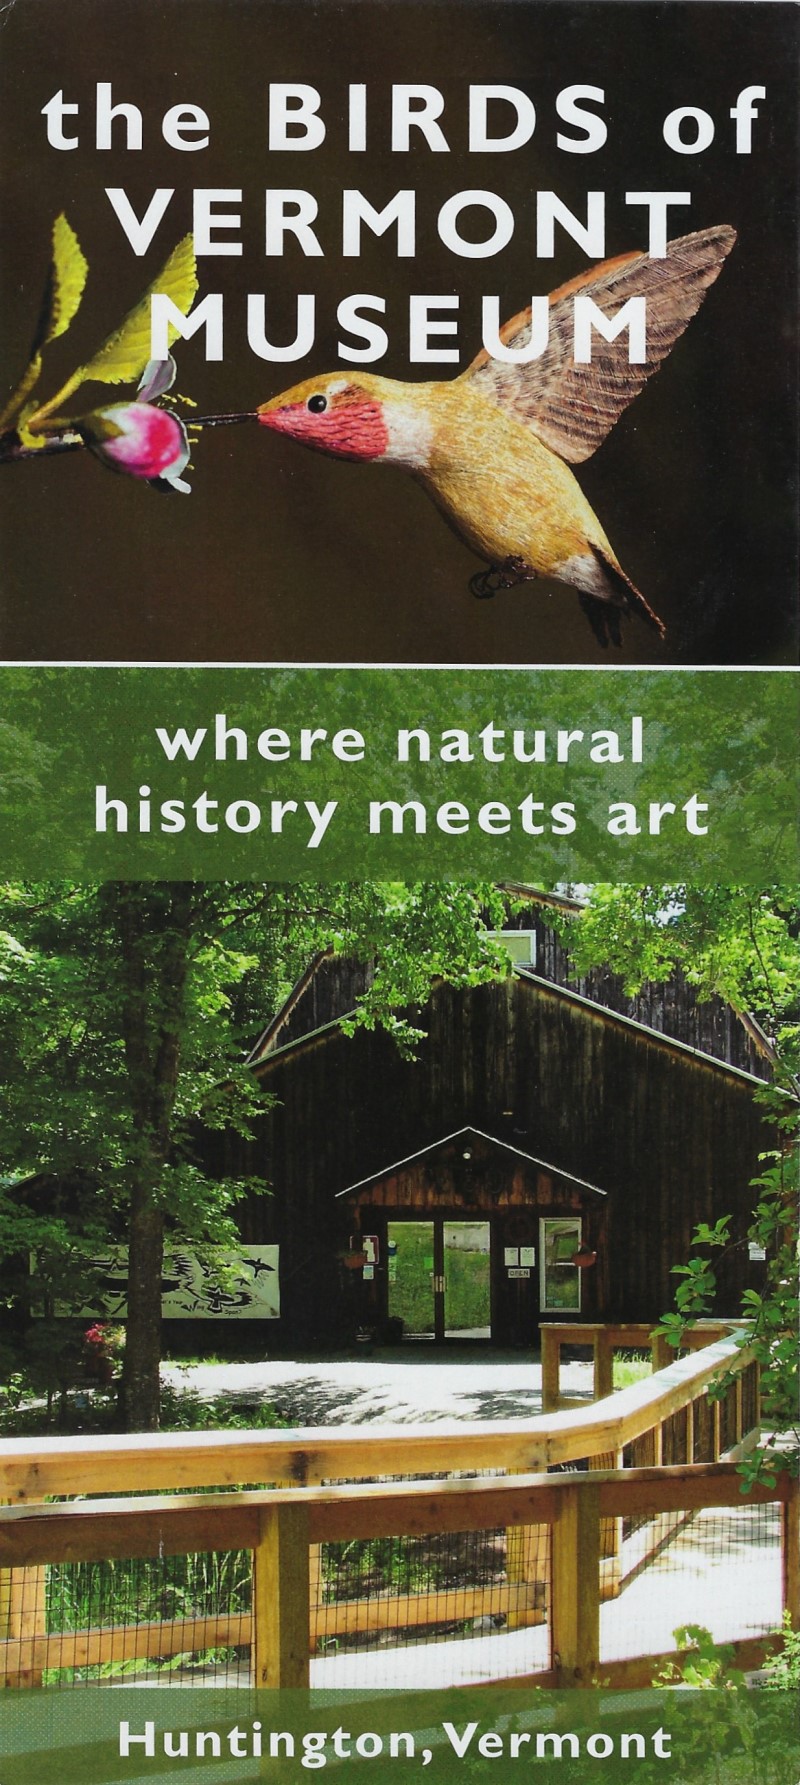 The Birds of Vermont Museum brochure thumbnail